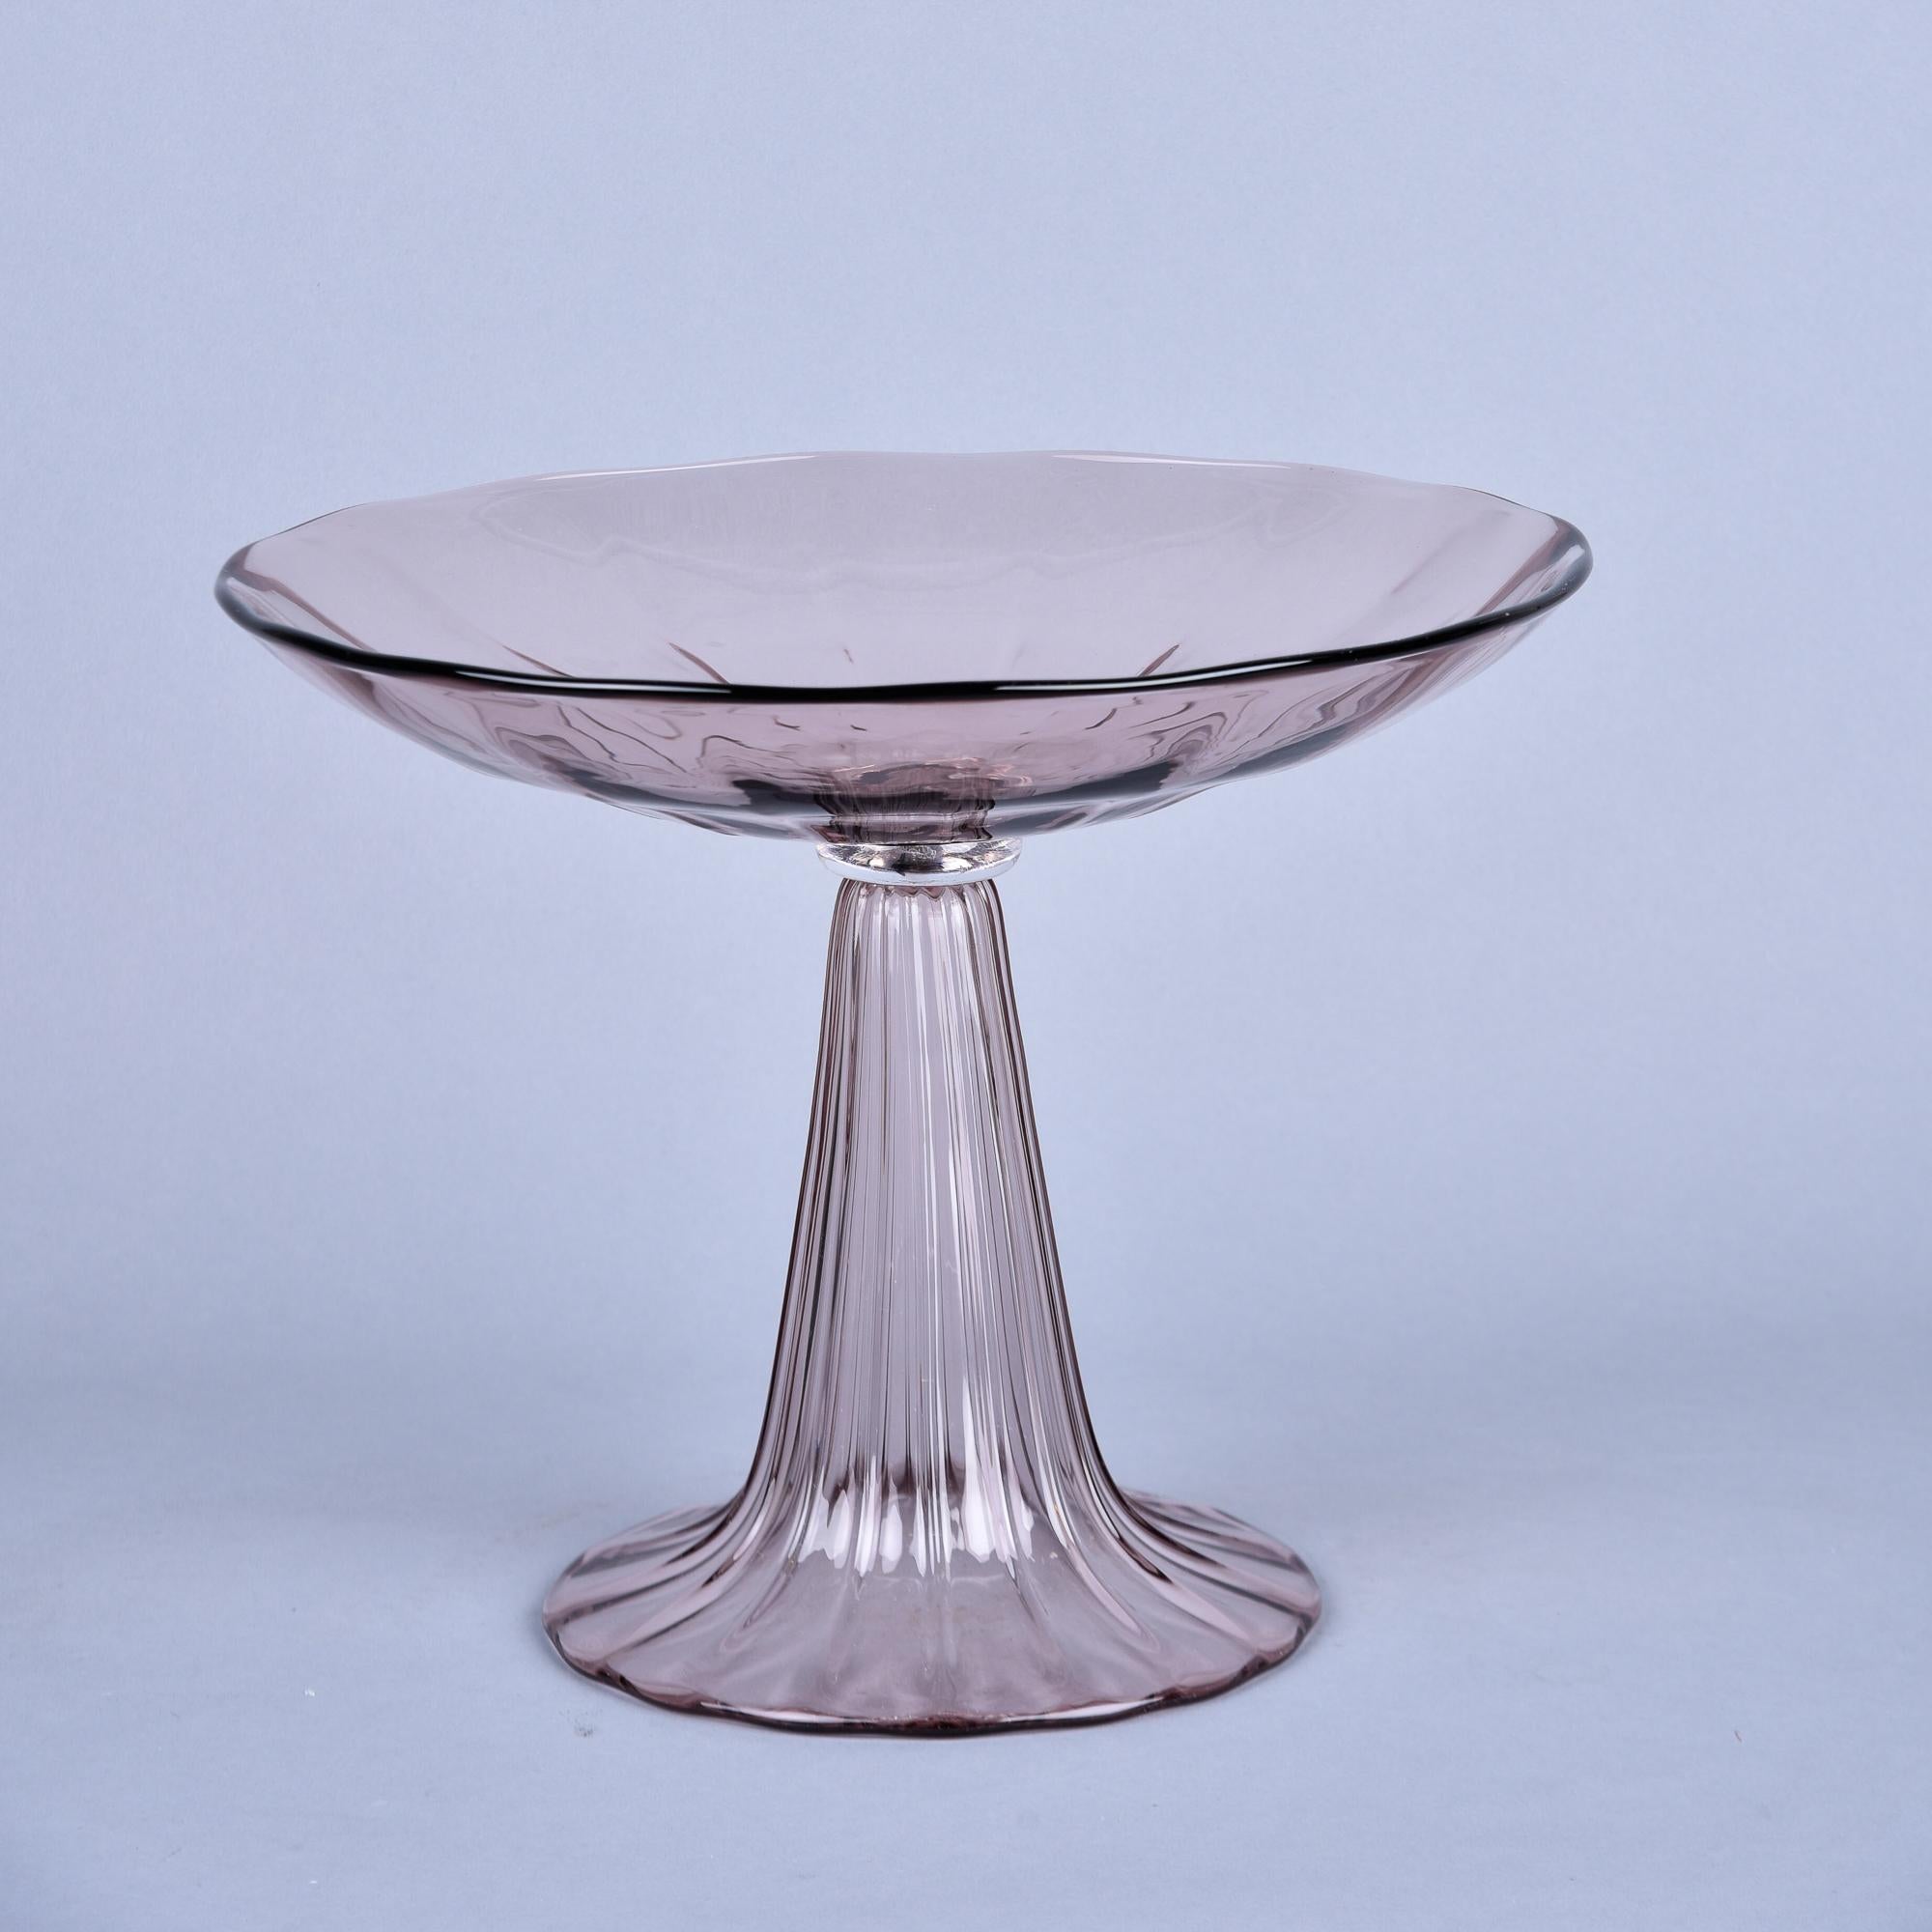 Tall Signed Roberto Cavalli Amethyst Murano Glass Tazza In Excellent Condition For Sale In Troy, MI